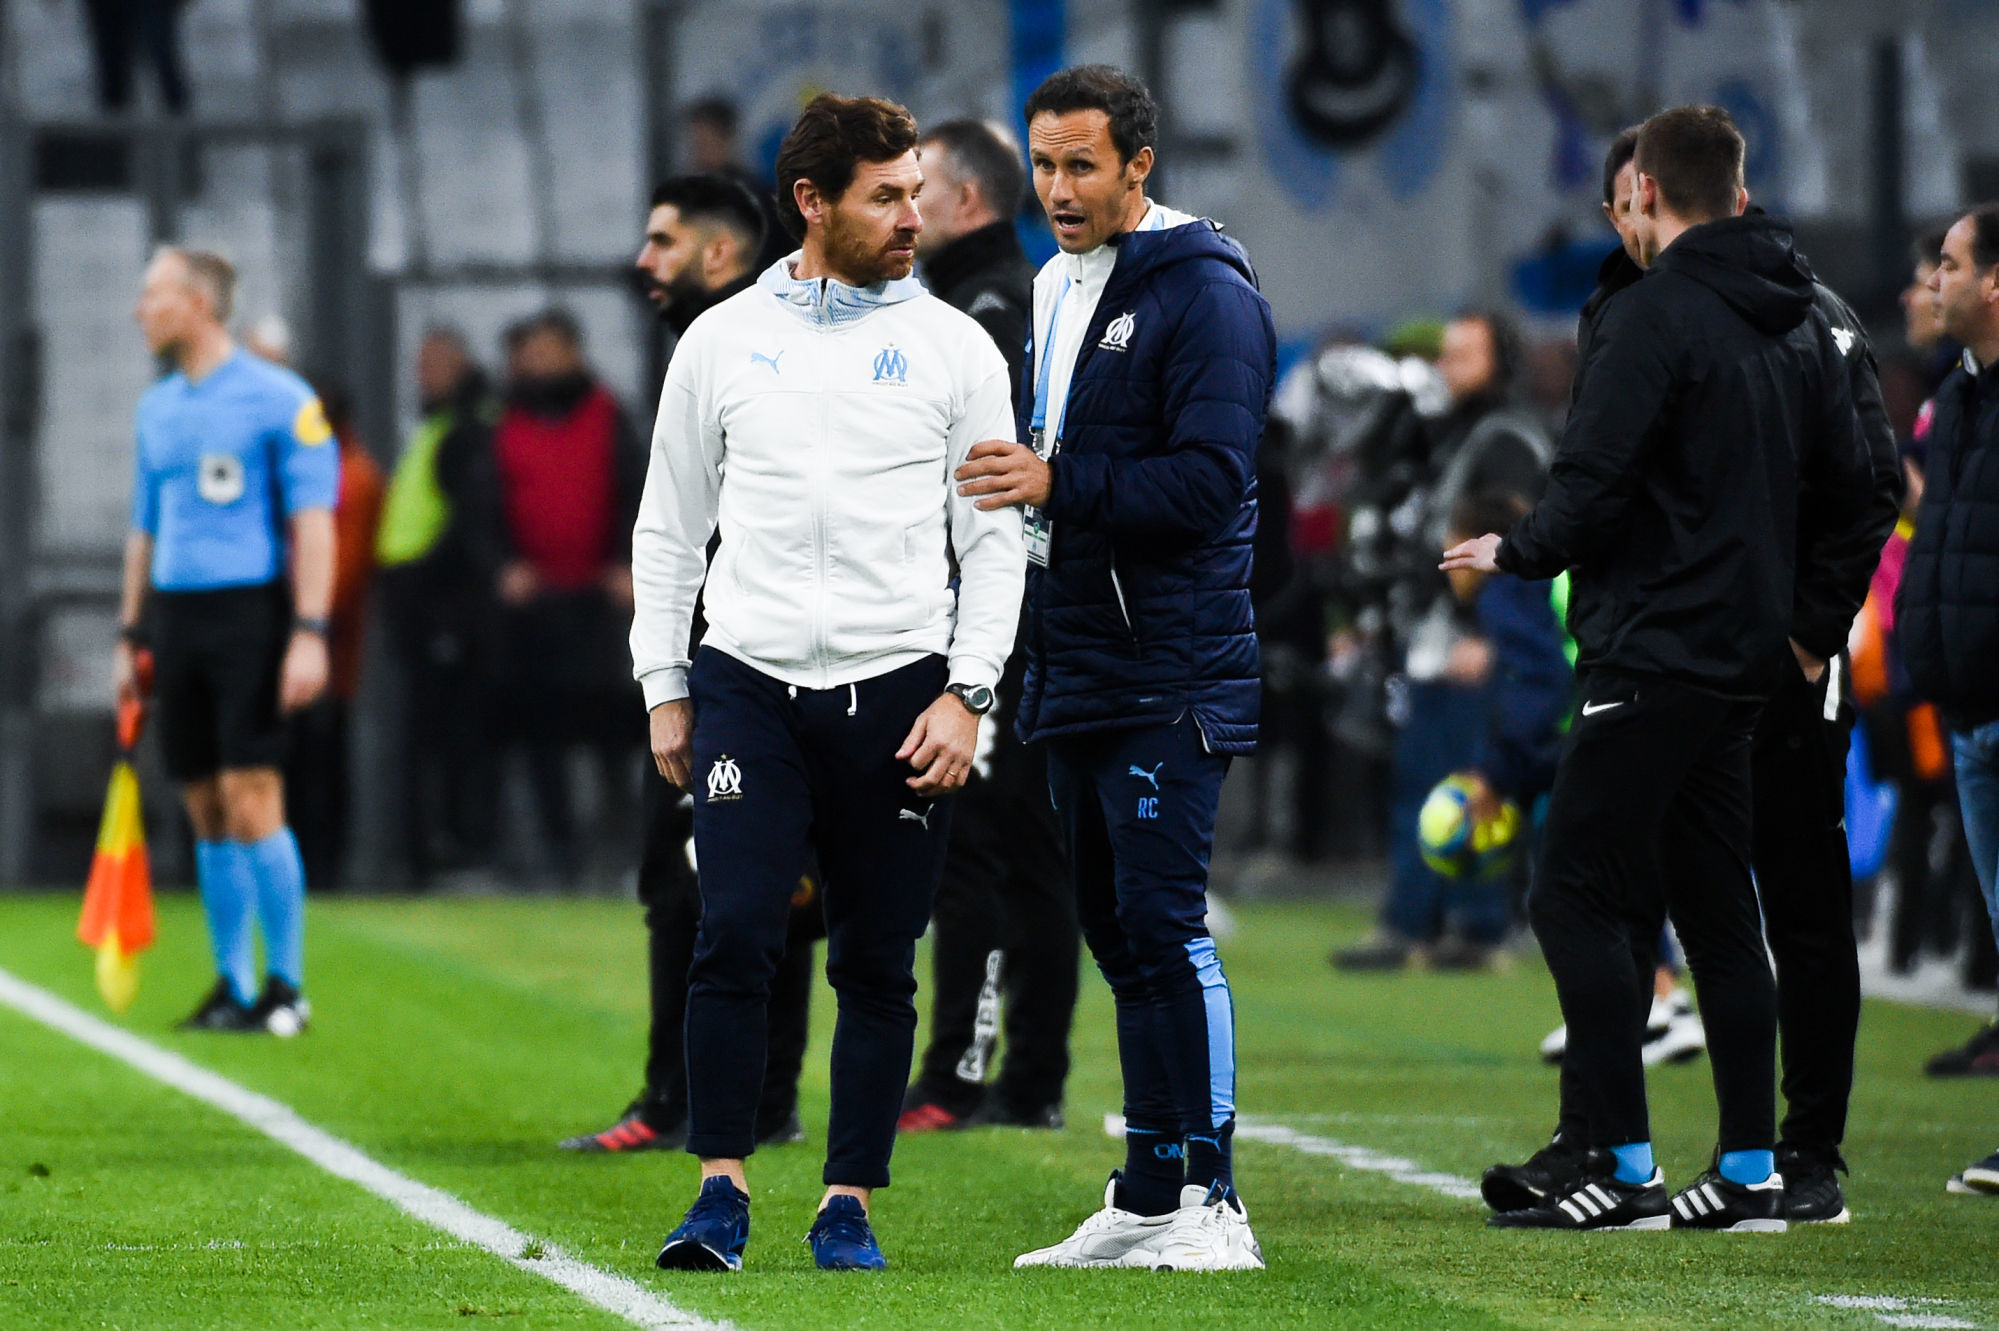 Andre Villas-Boas head coach of Marseille and Ricardo Carvalho assistant coach of Marseille  during the Ligue 1 match between Olympique Marseille and Angers SCO at Stade Velodrome on January 25, 2020 in Marseille, France. (Photo by Alexandre Dimou/Icon Sport) - Andre VILLAS BOAS - Ricardo CARVALHO - Orange Vélodrome - Marseille (France)